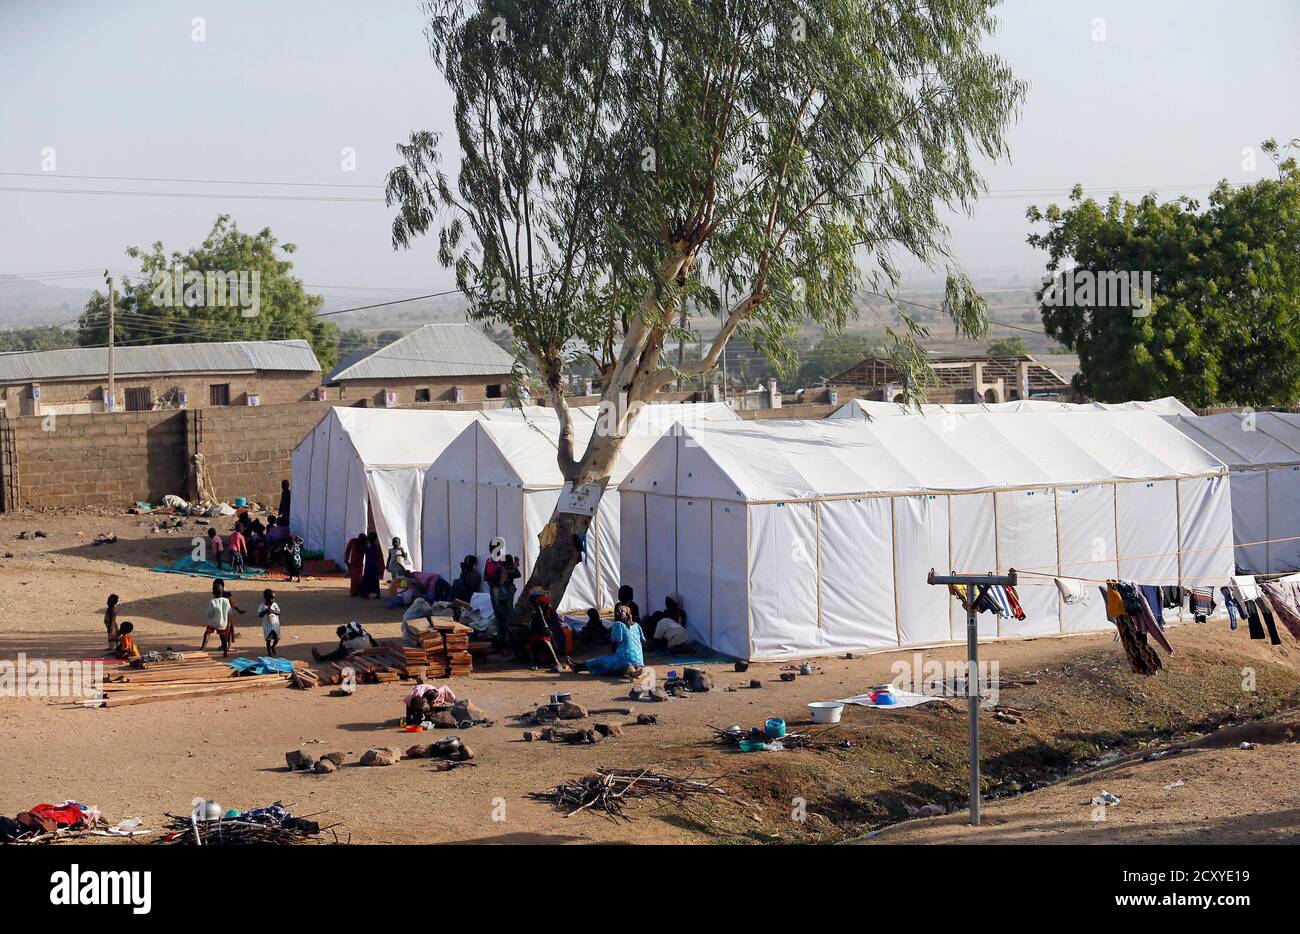 People displaced as a result of Boko Haram attacks in the northeast region of Nigeria, are seen near their tents at a faith-based camp for internally displaced people (IDP) in Yola, Adamawa State January 14, 2015. Boko Haram says it is building an Islamic state that will revive the glory days of northern Nigeria's medieval Muslim empires, but for those in its territory life is a litany of killings, kidnappings, hunger and economic collapse. Picture taken January 14. To match Insight NIGERIA-BOKOHARAM/     REUTERS/Afolabi Sotunde (NIGERIA - Tags: CIVIL UNREST SOCIETY) Stock Photo